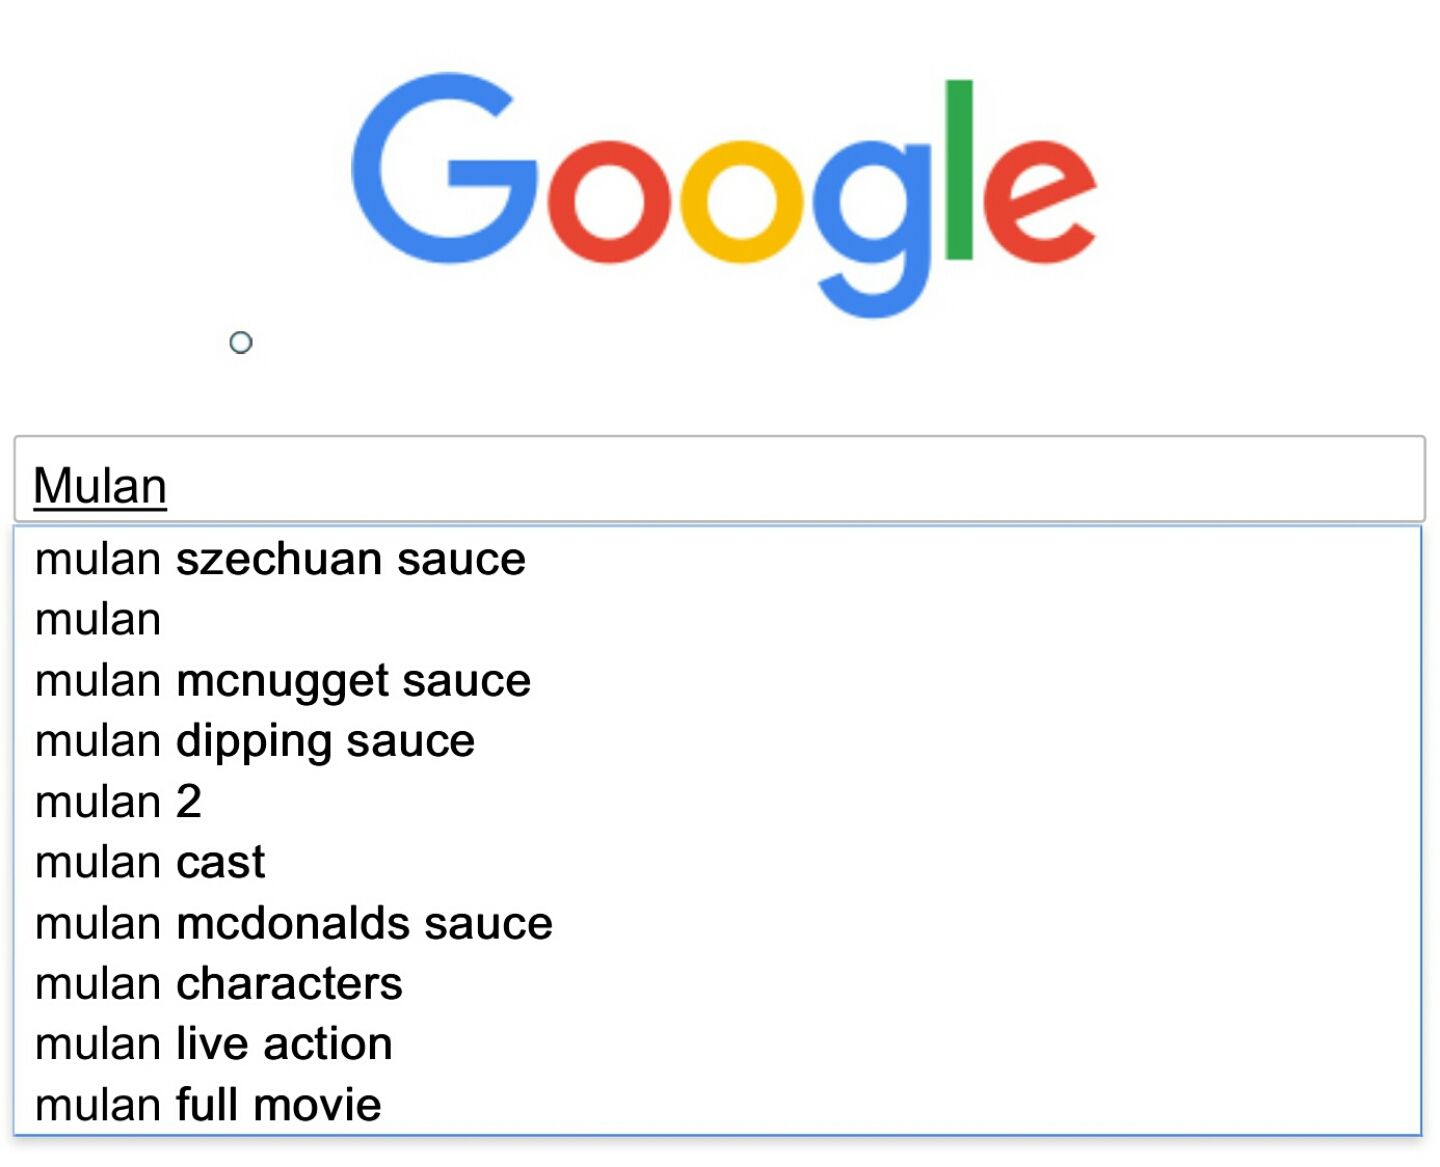 How popular is Rick and Morty? Popular enough to change Google top result